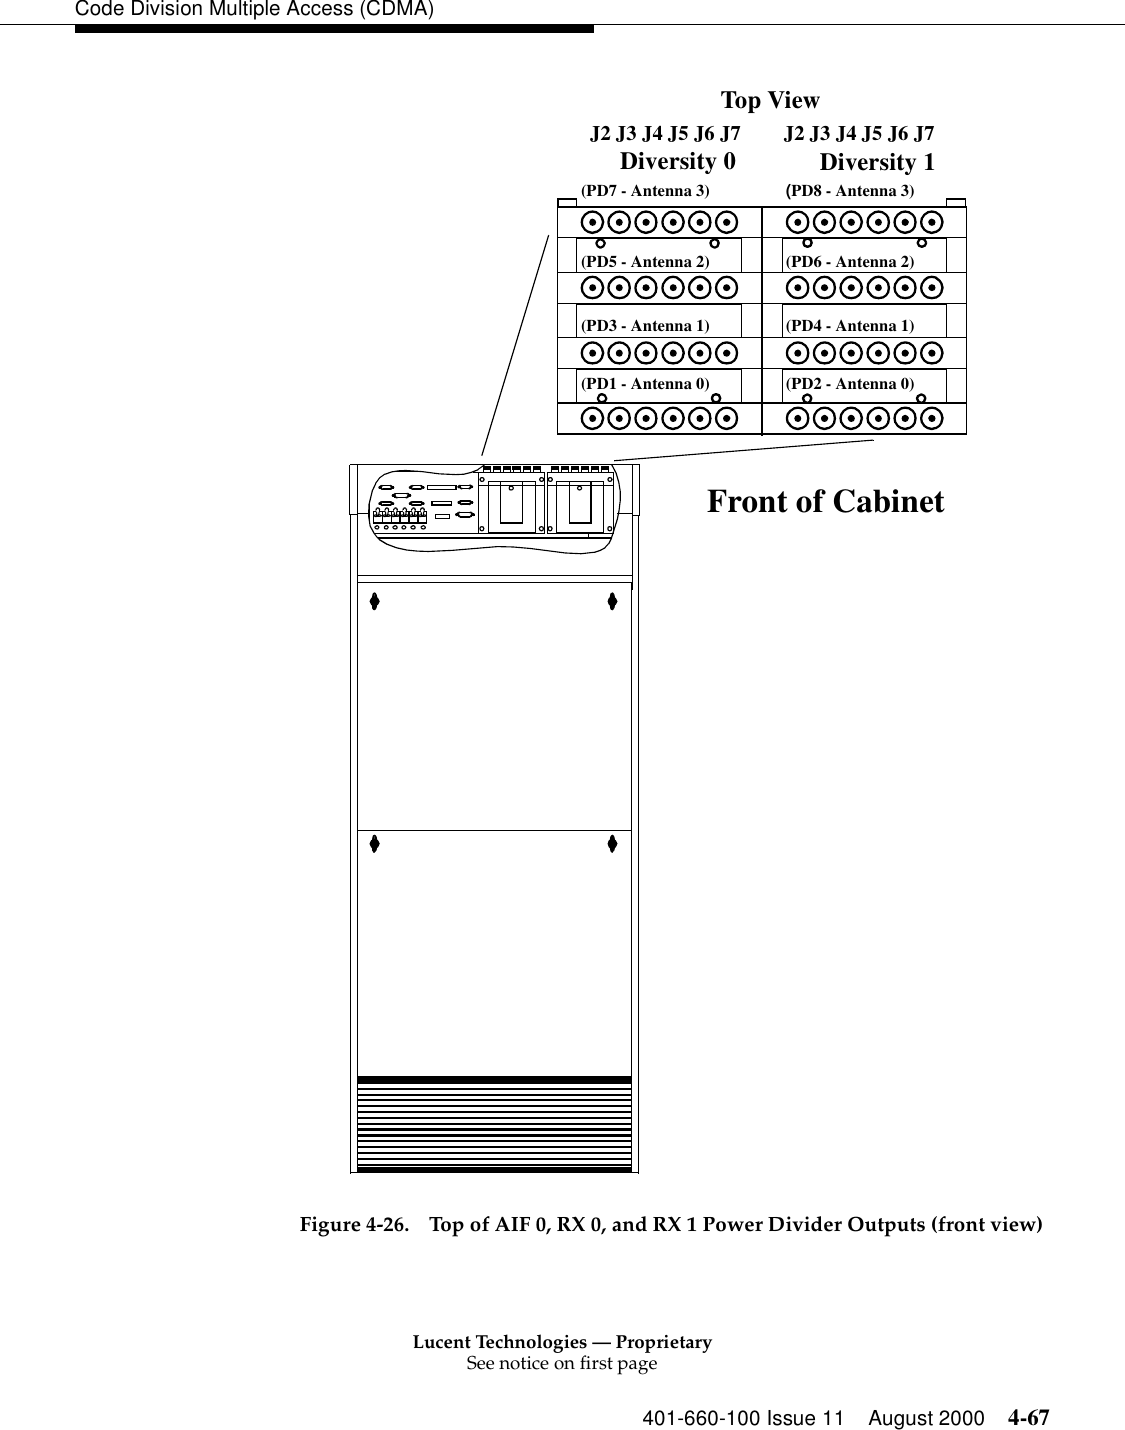 Lucent Technologies — ProprietarySee notice on first page401-660-100 Issue 11 August 2000 4-67Code Division Multiple Access (CDMA)Figure 4-26. Top of AIF 0, RX 0, and RX 1 Power Divider Outputs (front view)Top ViewJ2 J3 J4 J5 J6 J7 J2 J3 J4 J5 J6 J7(PD7 - Antenna 3) (PD8 - Antenna 3)(PD5 - Antenna 2) (PD6 - Antenna 2)(PD3 - Antenna 1) (PD4 - Antenna 1)(PD1 - Antenna 0) (PD2 - Antenna 0)Diversity 0 Diversity 1Front of Cabinet